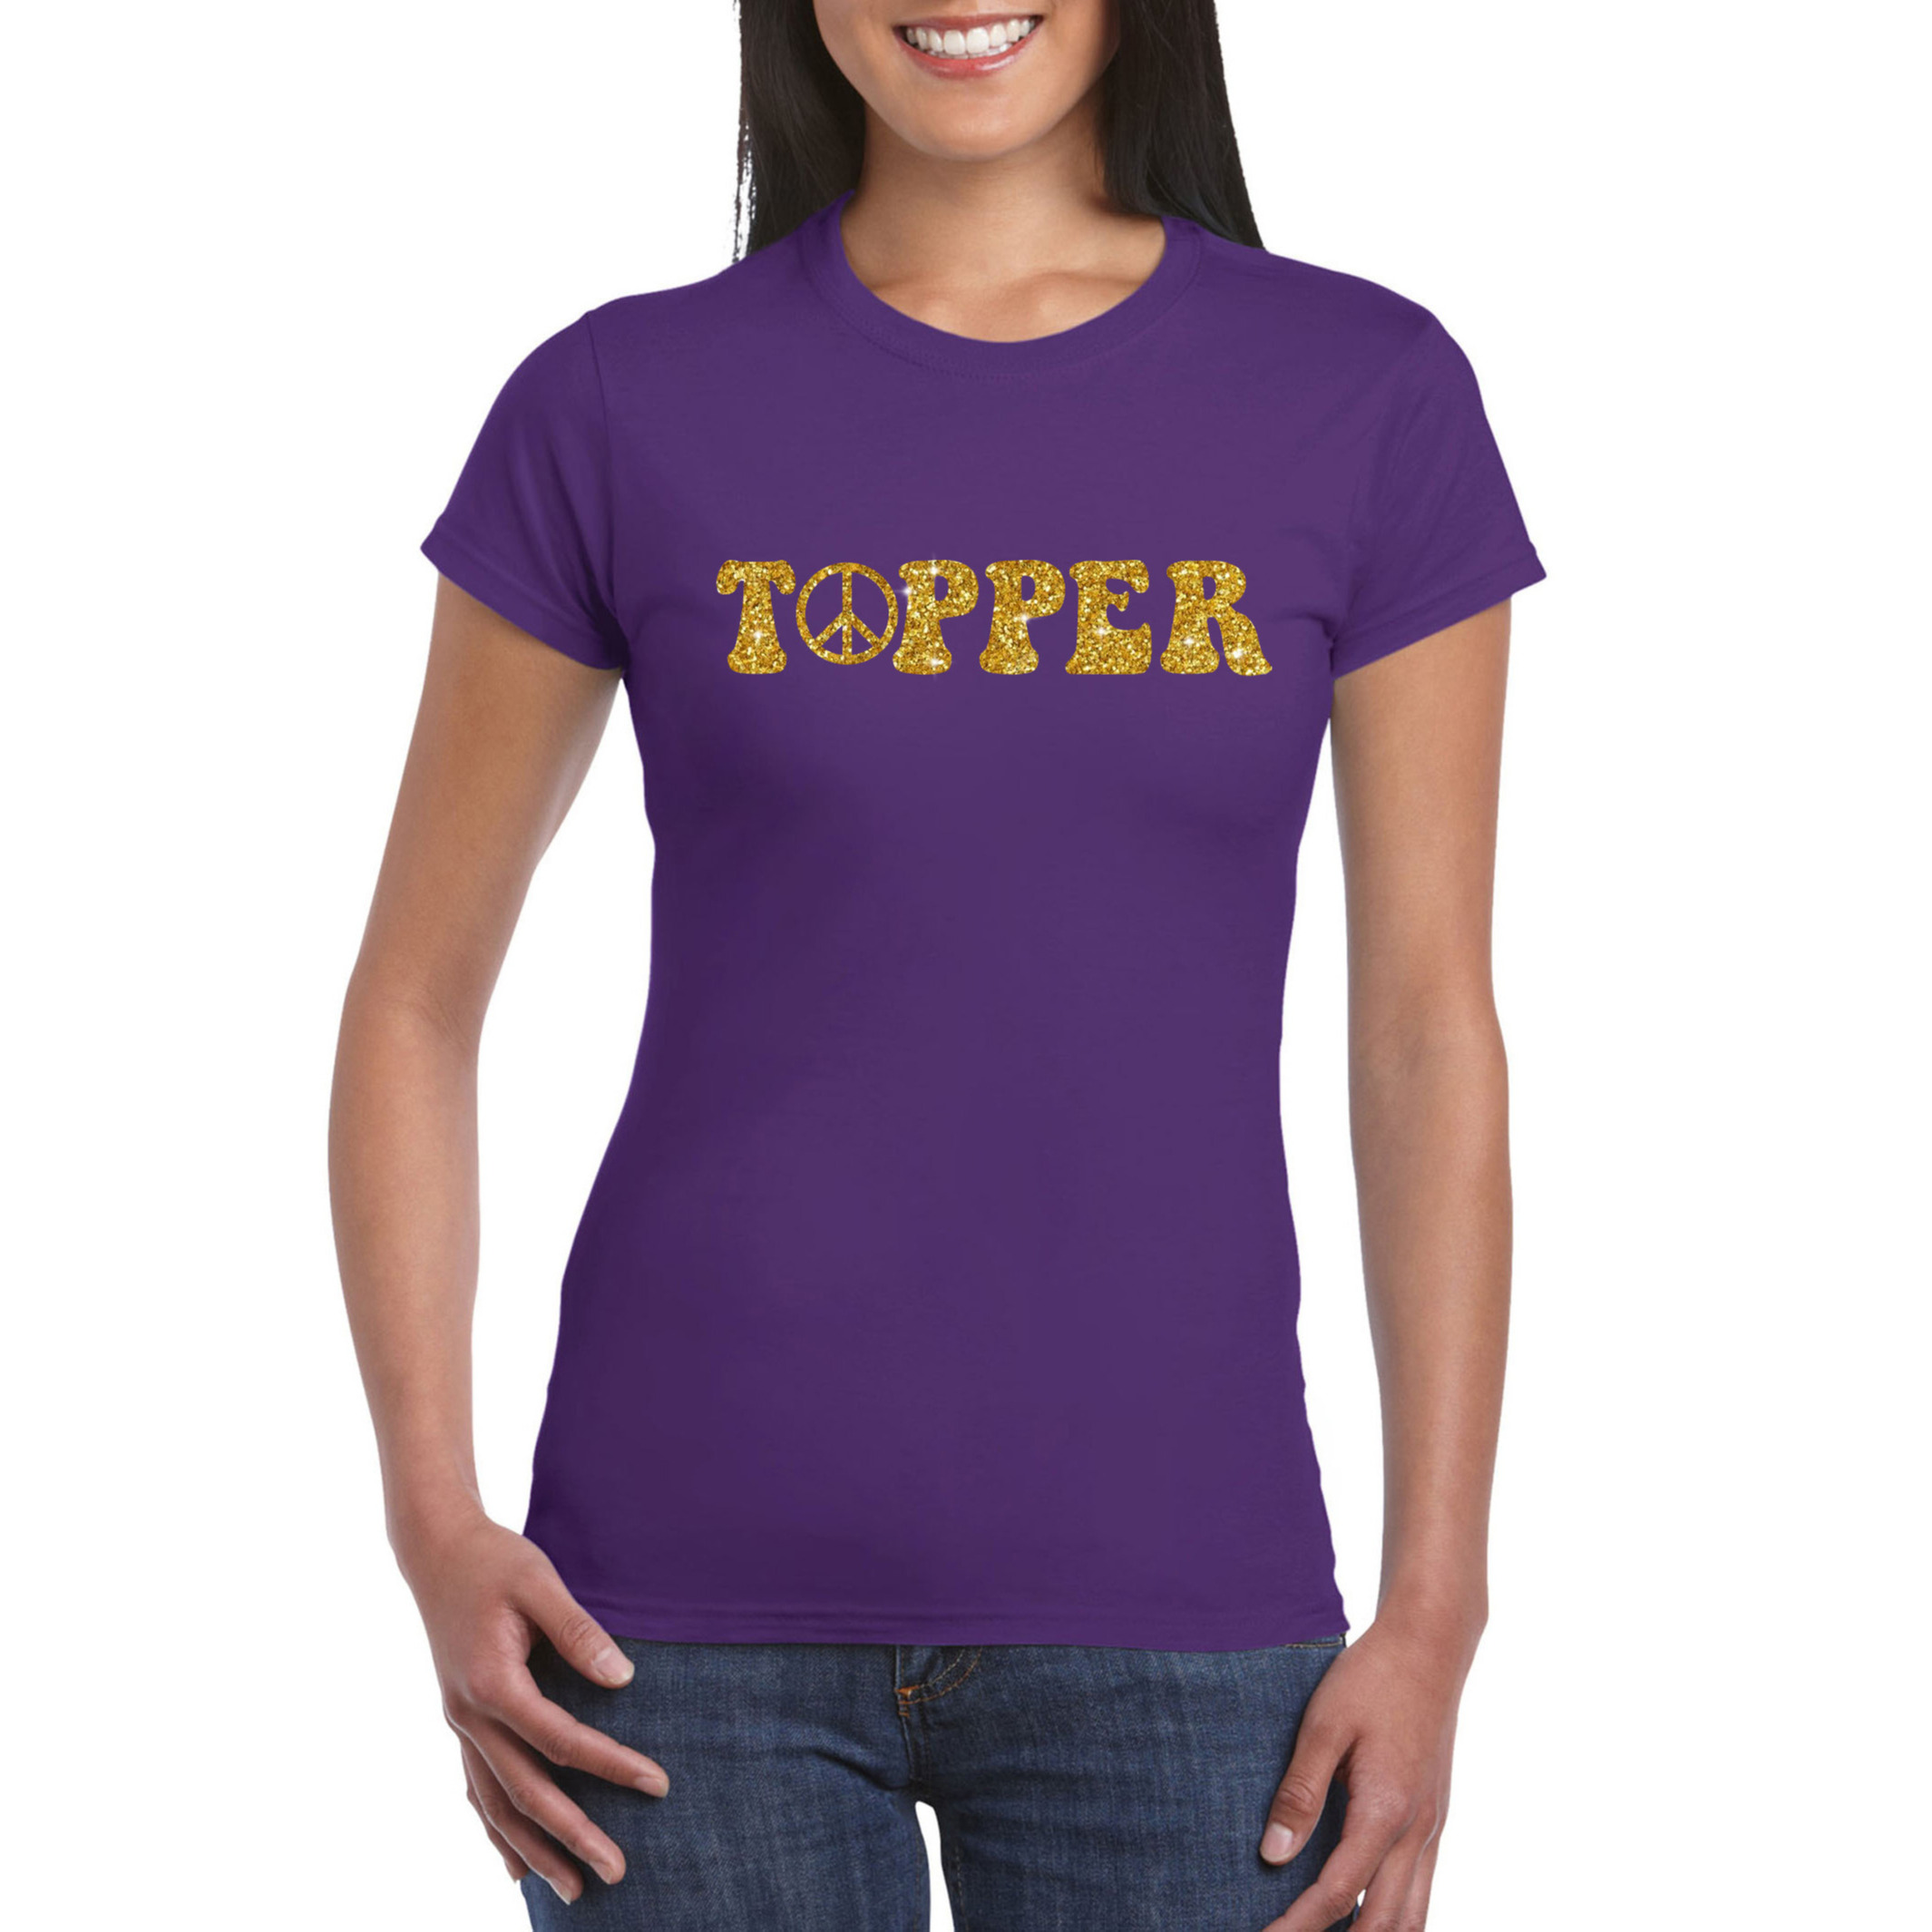 Toppers Paars Flower Power t-shirt Topper met gouden letters dames